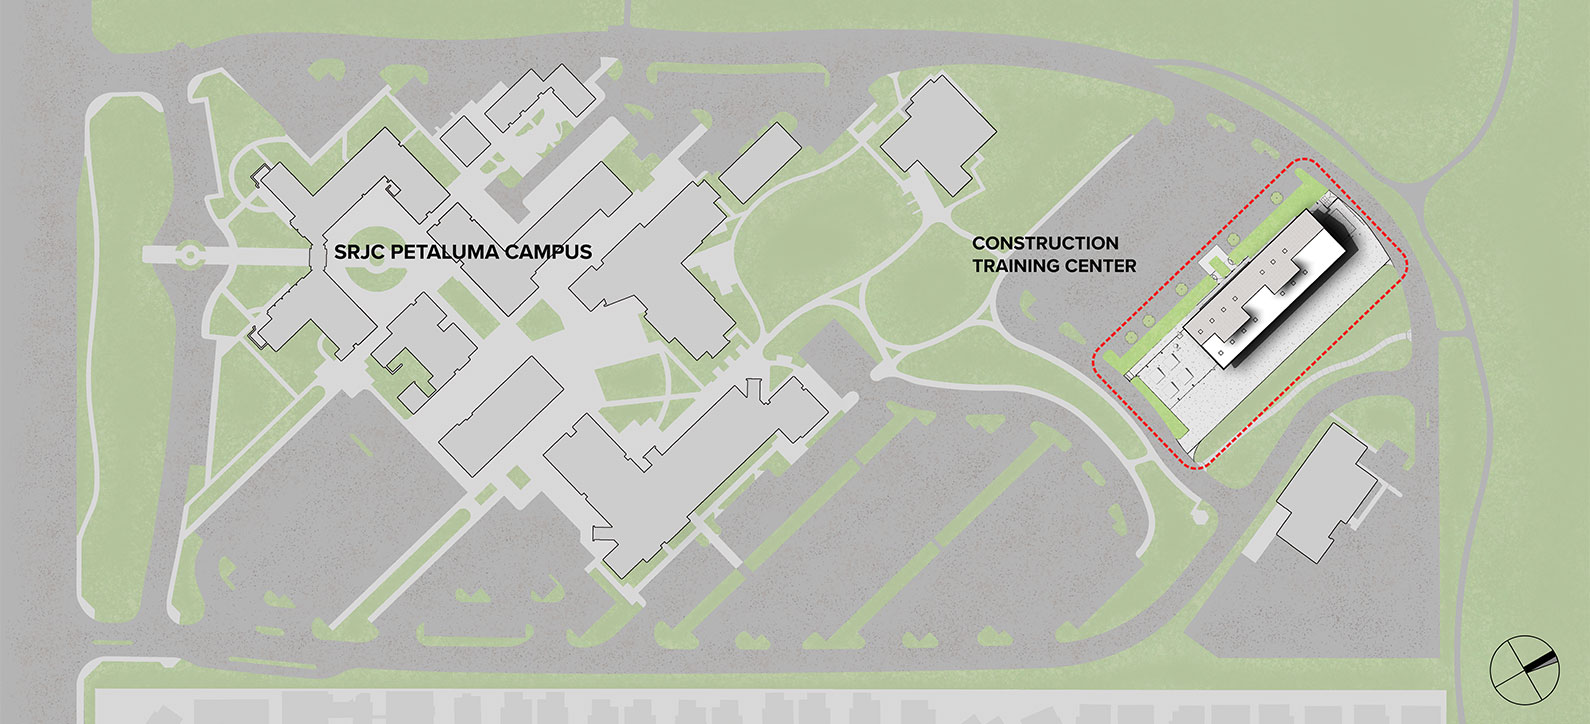 Site plan diagram showing the location of the Construction Training Center at the SRJC Petaluma Campus